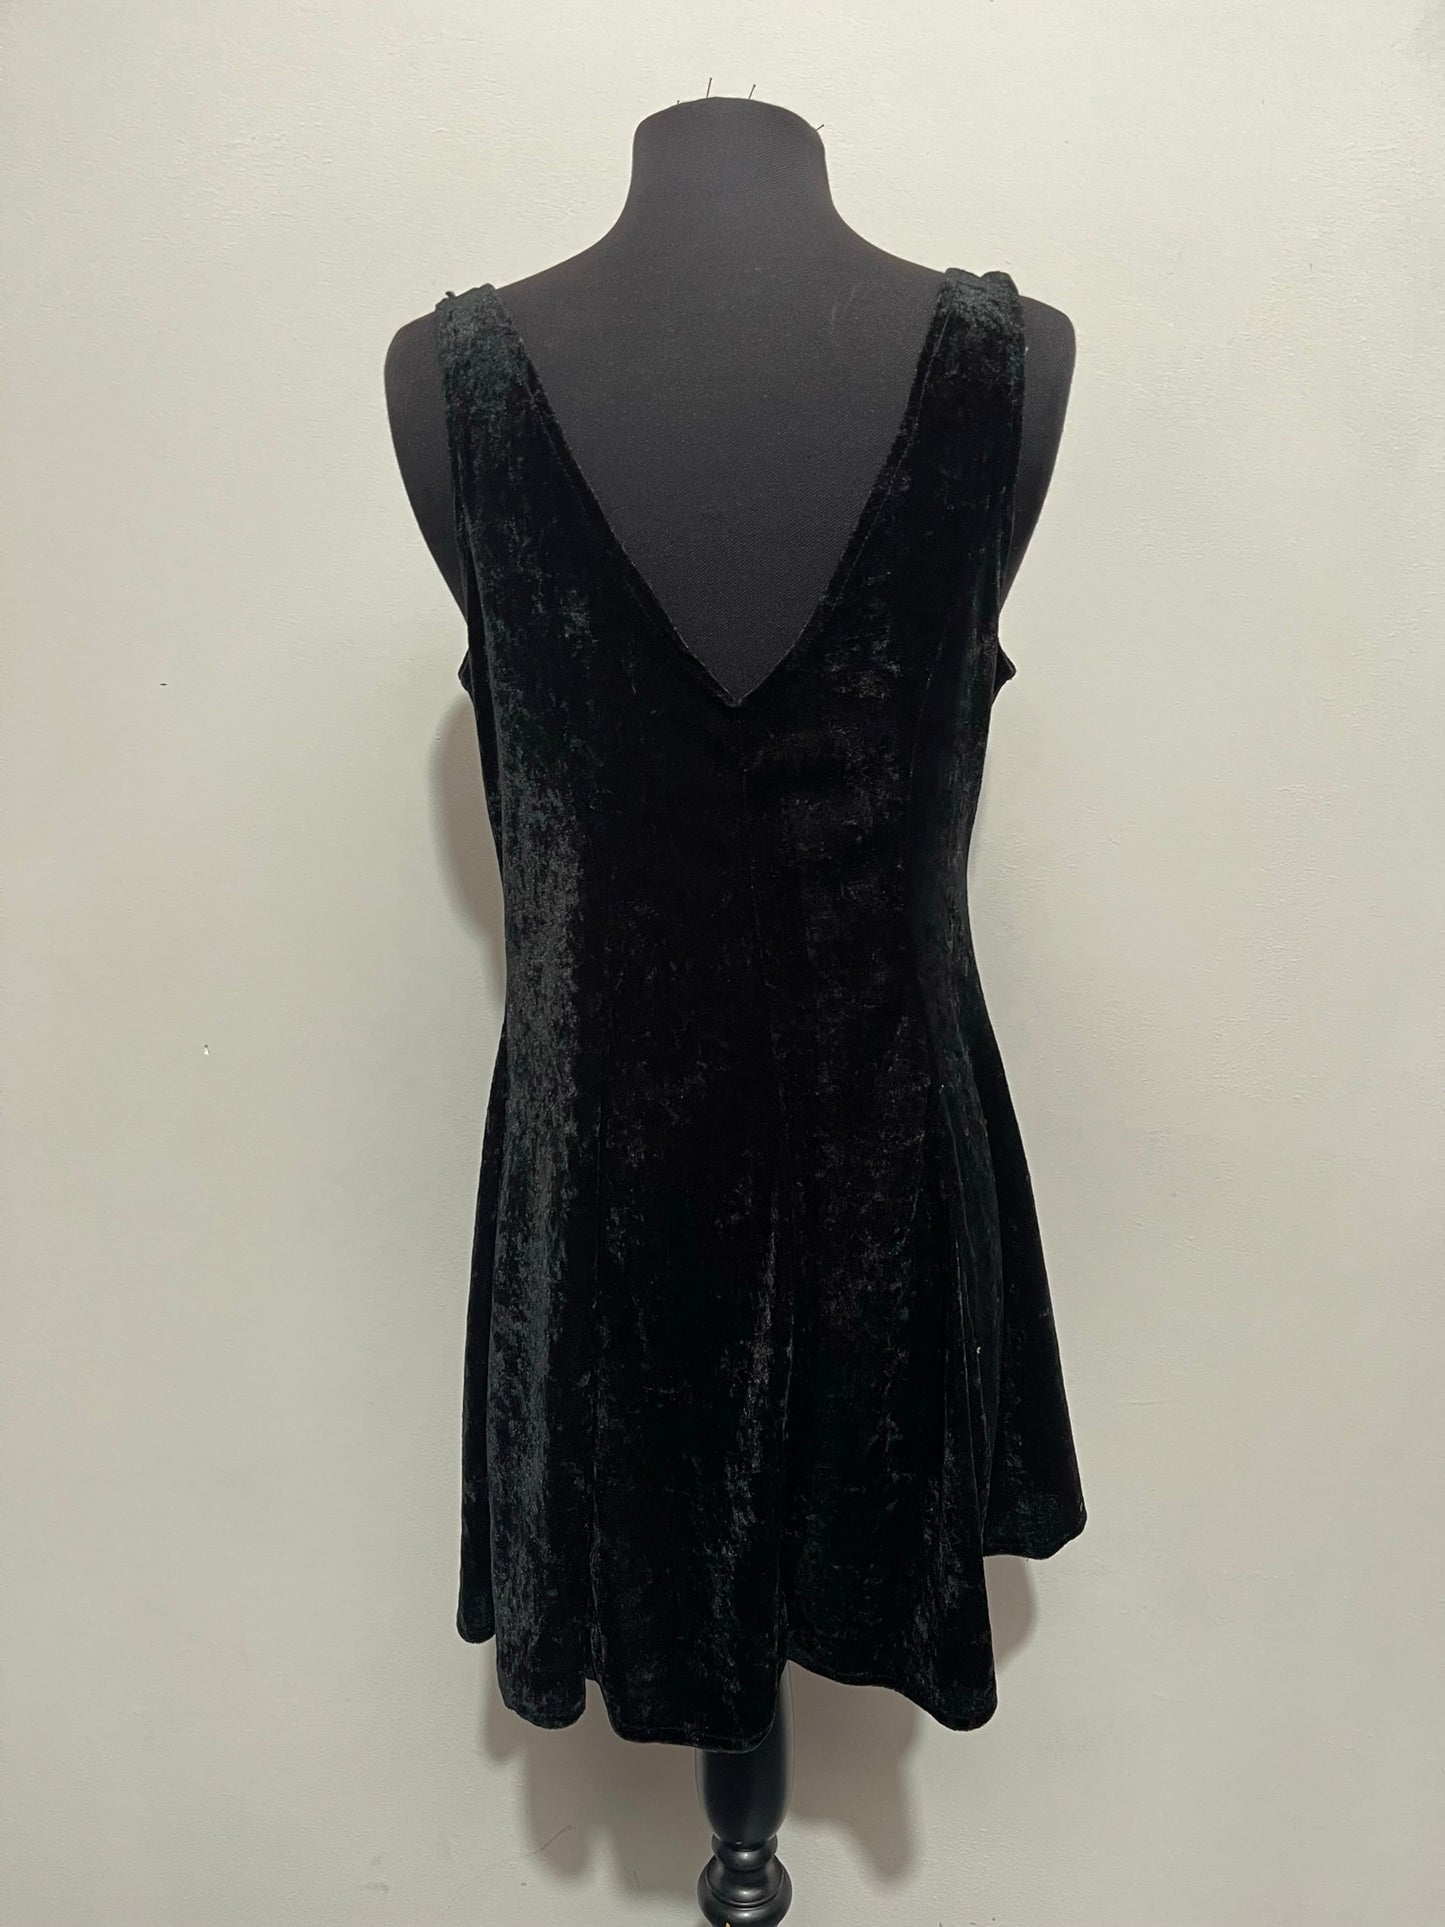 Little Black Dress Insight Clothing Halloween costume Size 12-14 (label says 16)